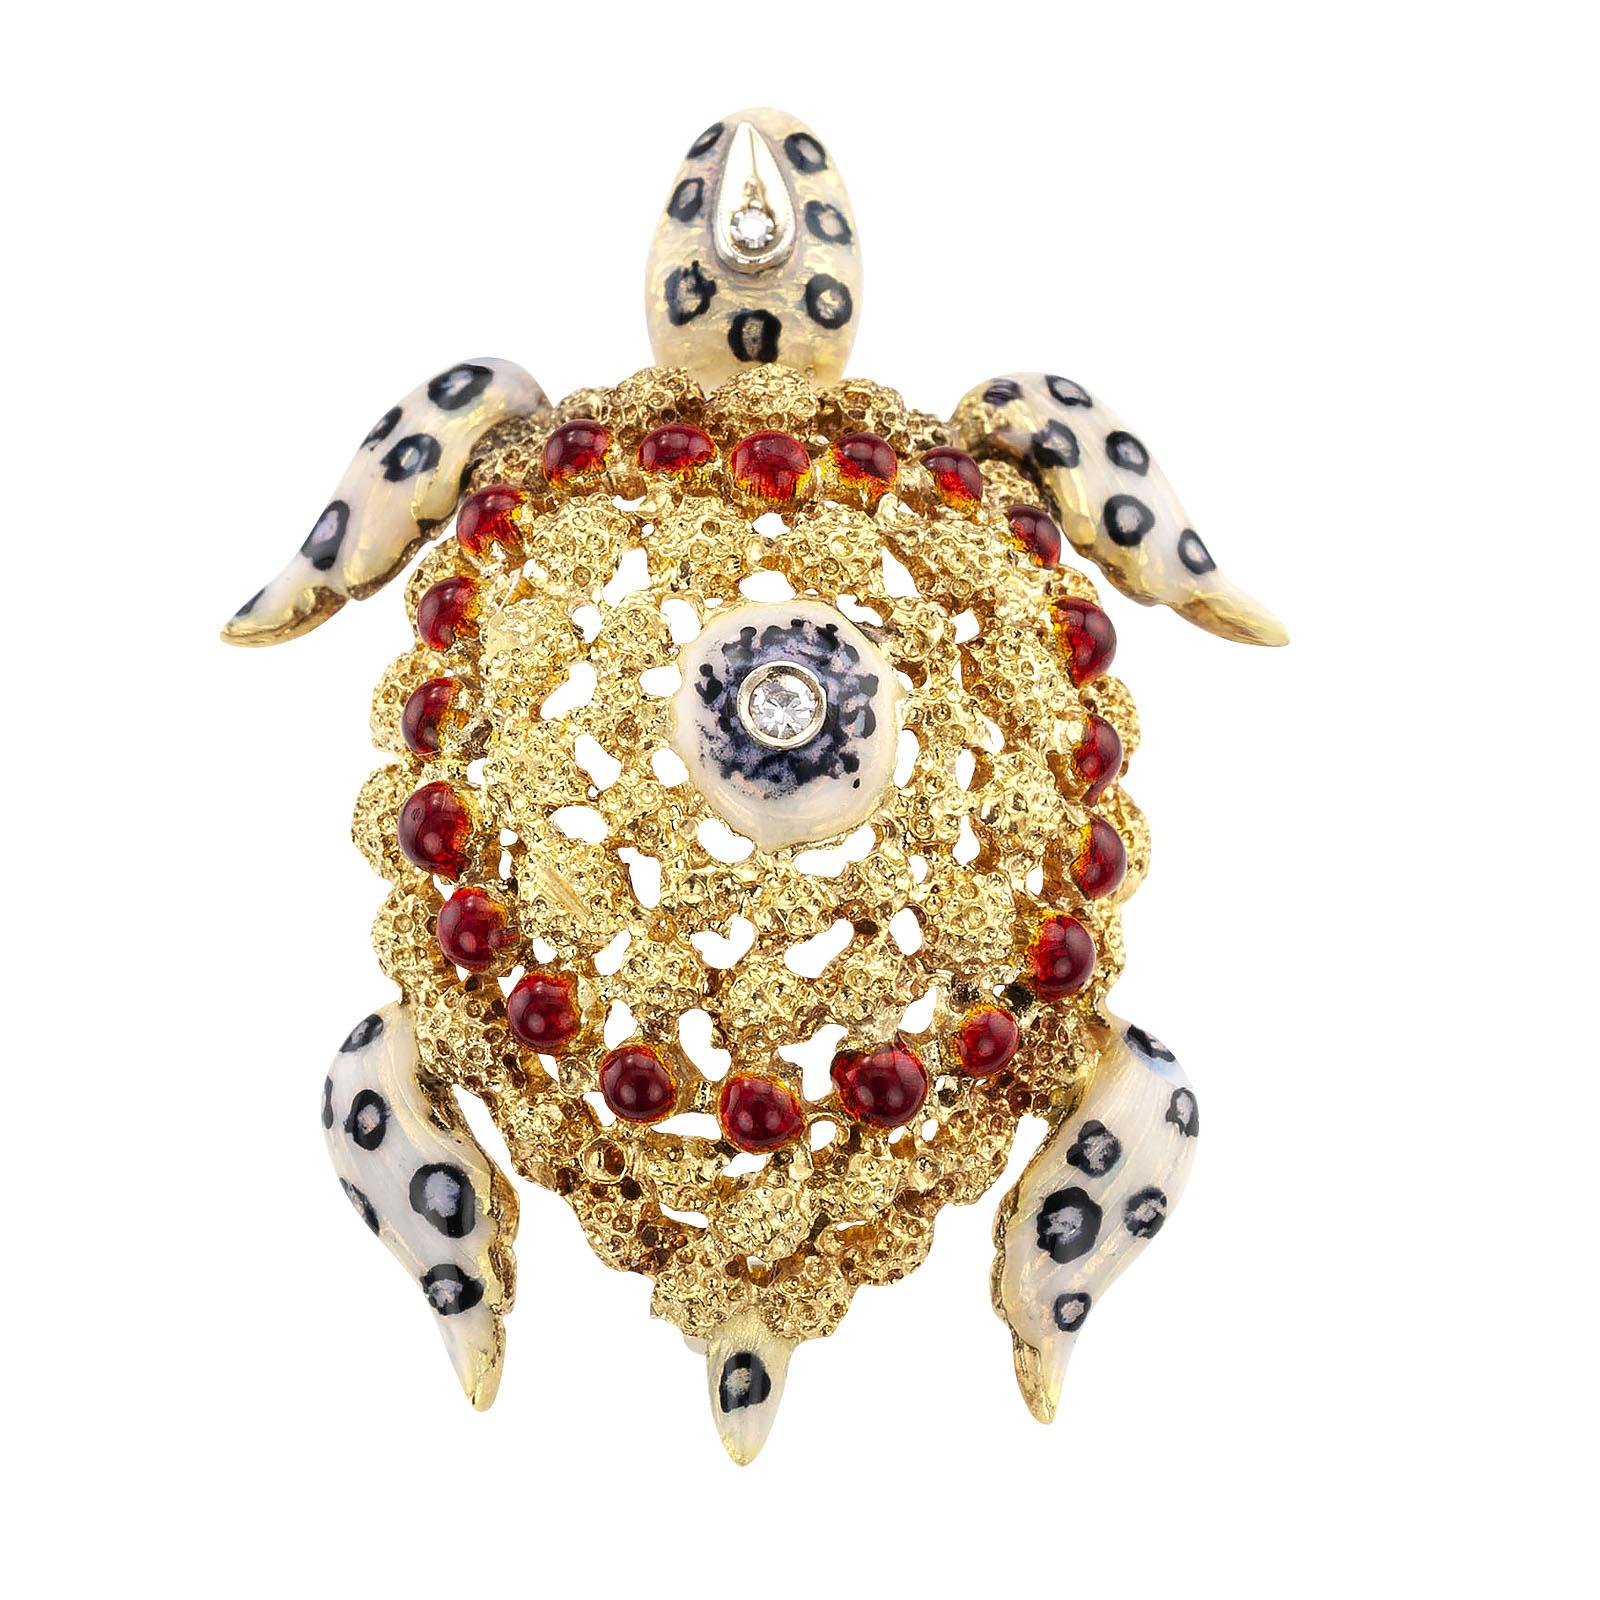 Enamel and diamond yellow gold sea turtle brooch circa 1970.

DETAILS:

DIAMONDS: two round single-cut diamonds totaling approximately 0.04 carat.

METAL: 18-karat yellow gold applied with dark blue, reddish and white enamel.

MEASUREMENTS: